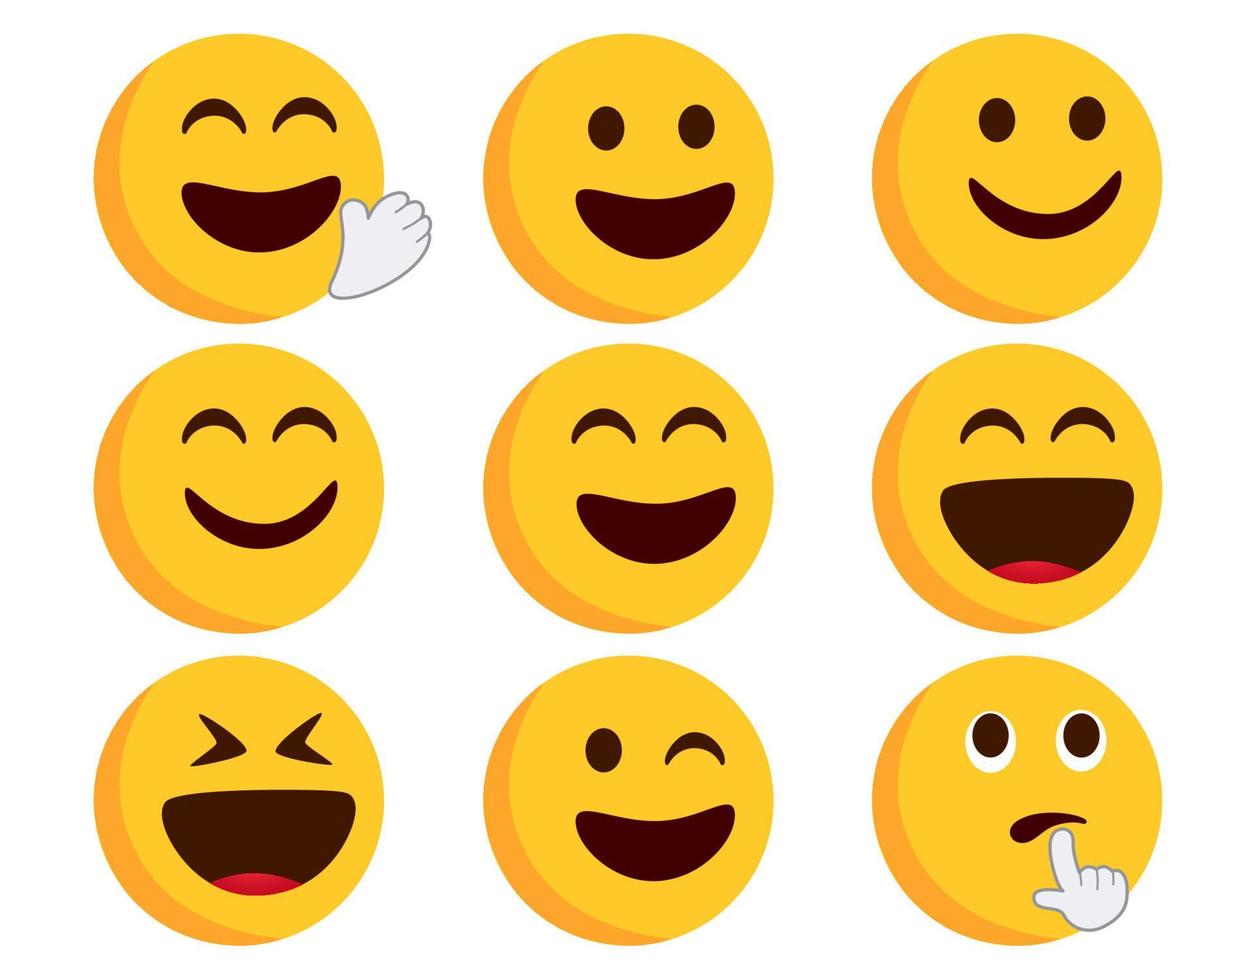 Emoticon flat vector set. Emoticons character in happy, smiling and laughing expressions with hand gestures of waving and thinking for emoji collection design. Vector illustration.